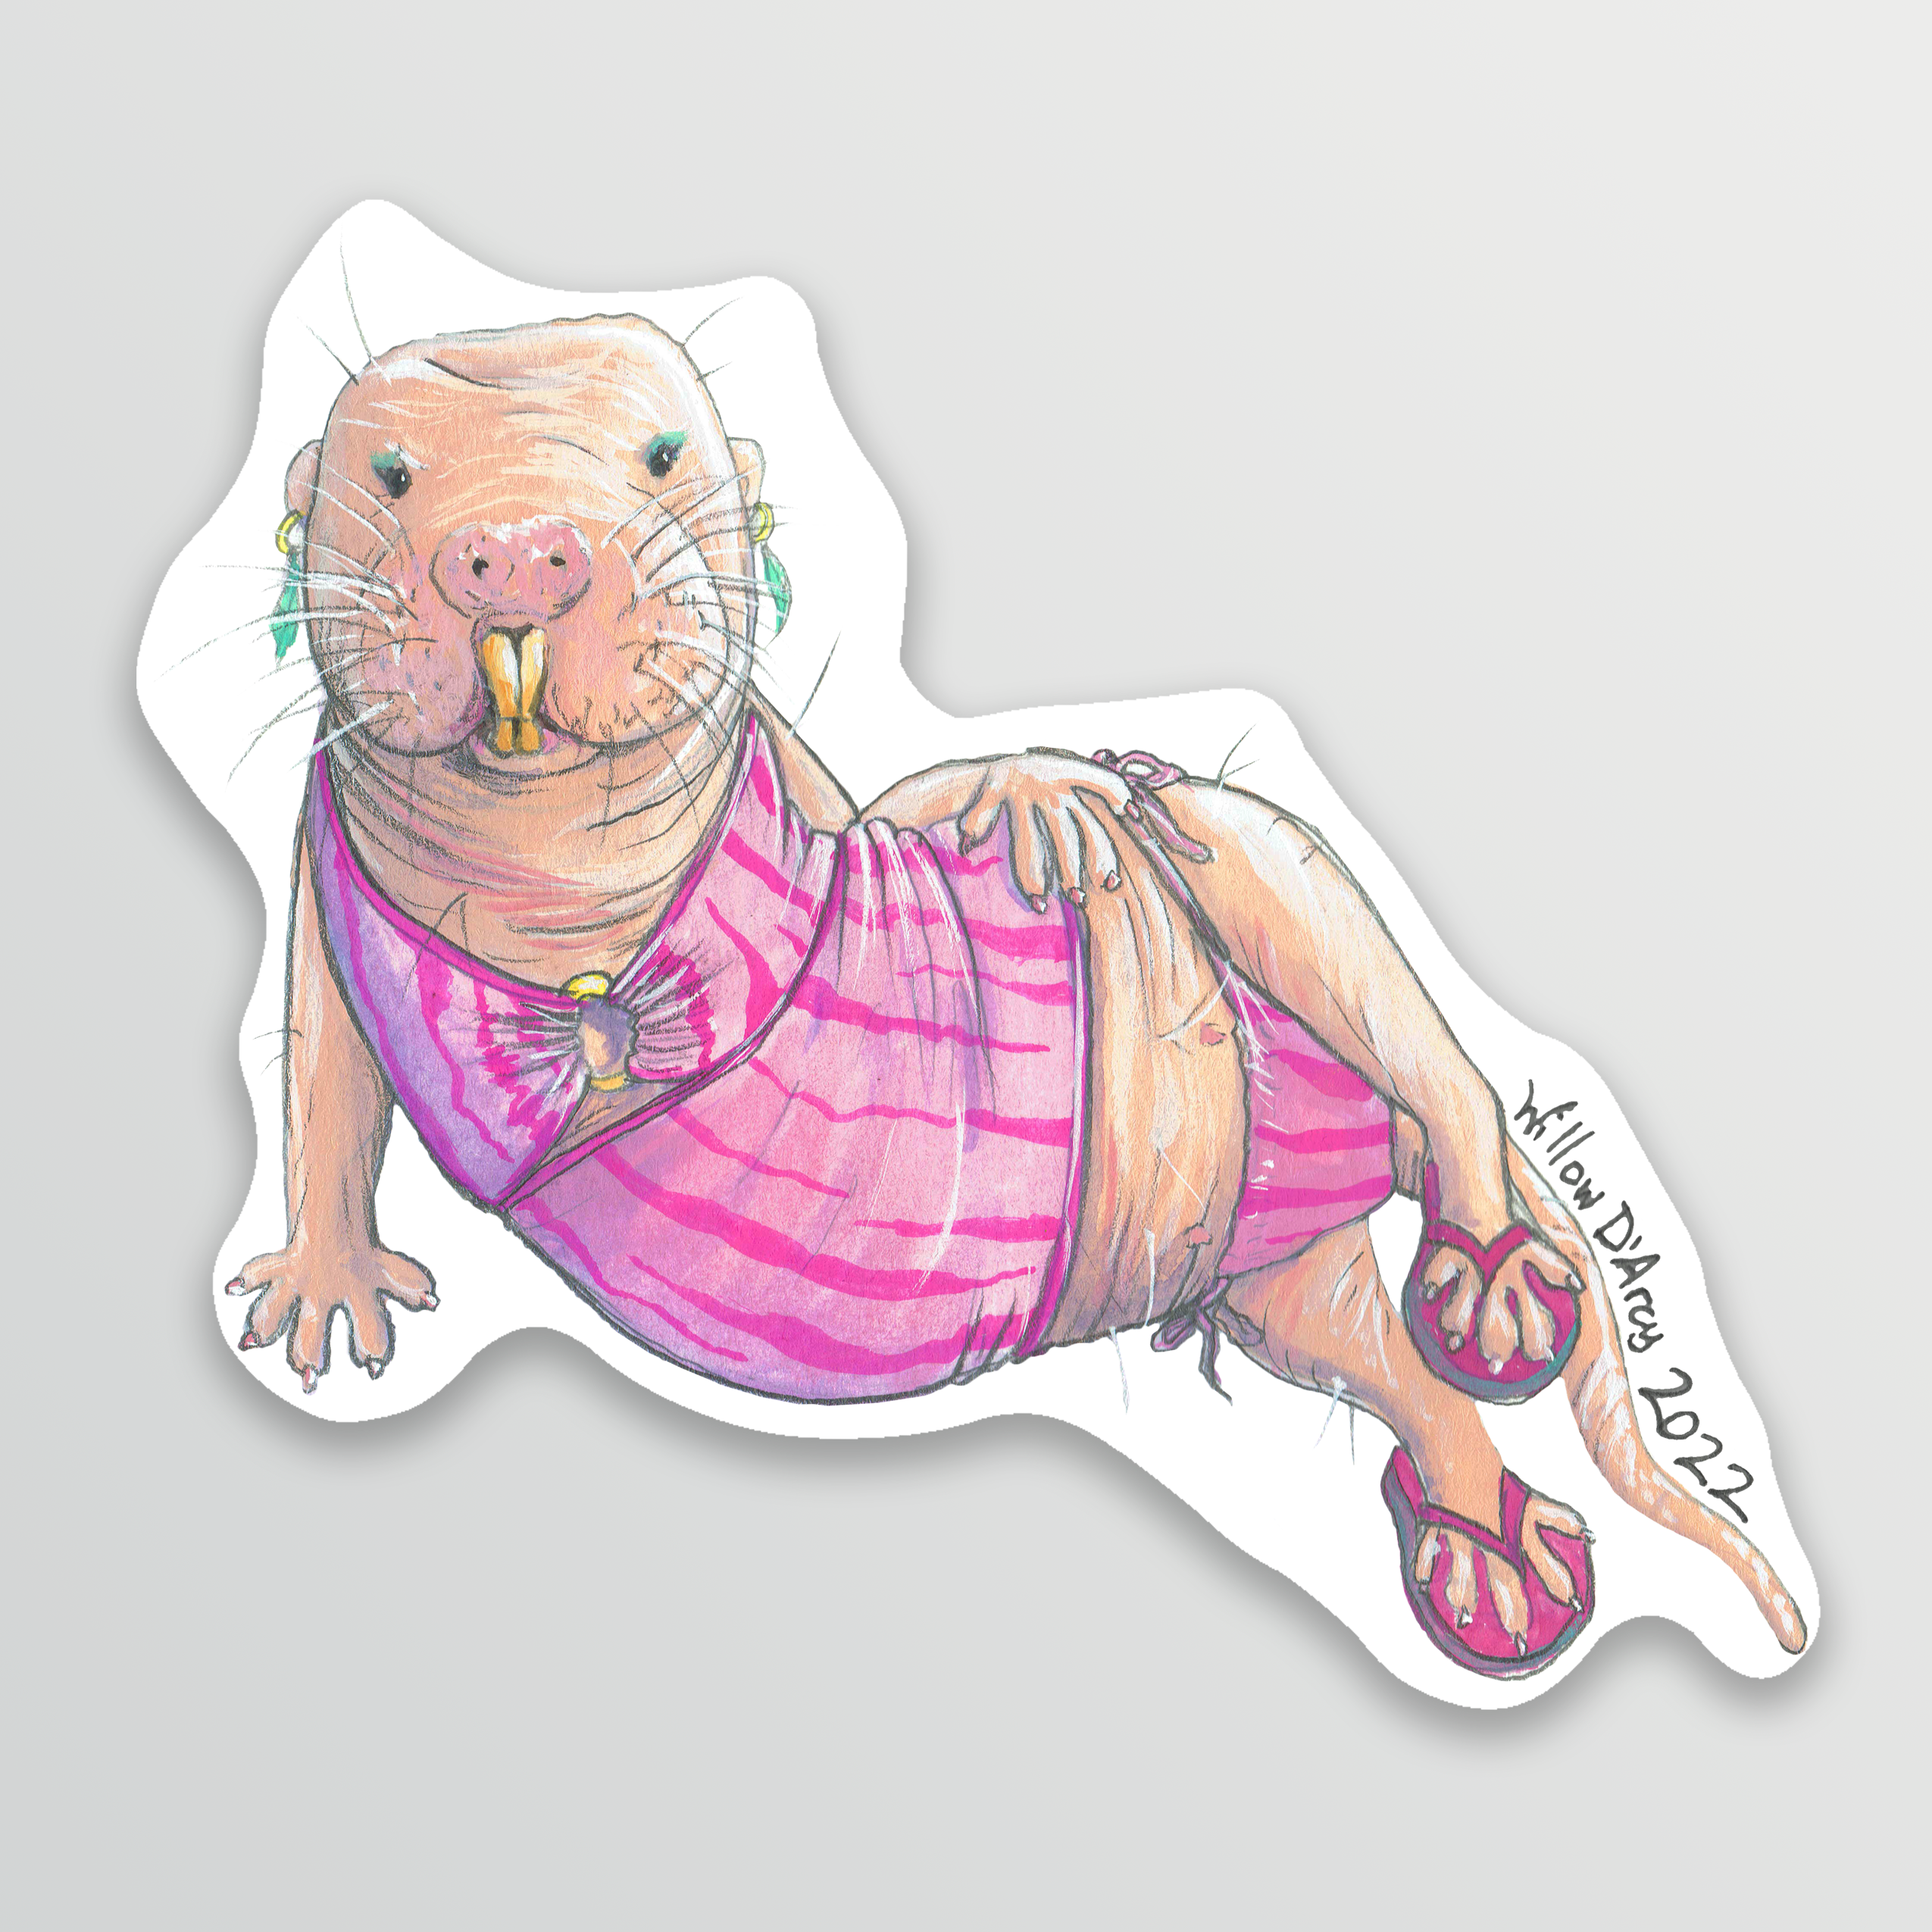 Sticker of an illustration of a naked mole rat wearing a cute pink bikini and sandals.